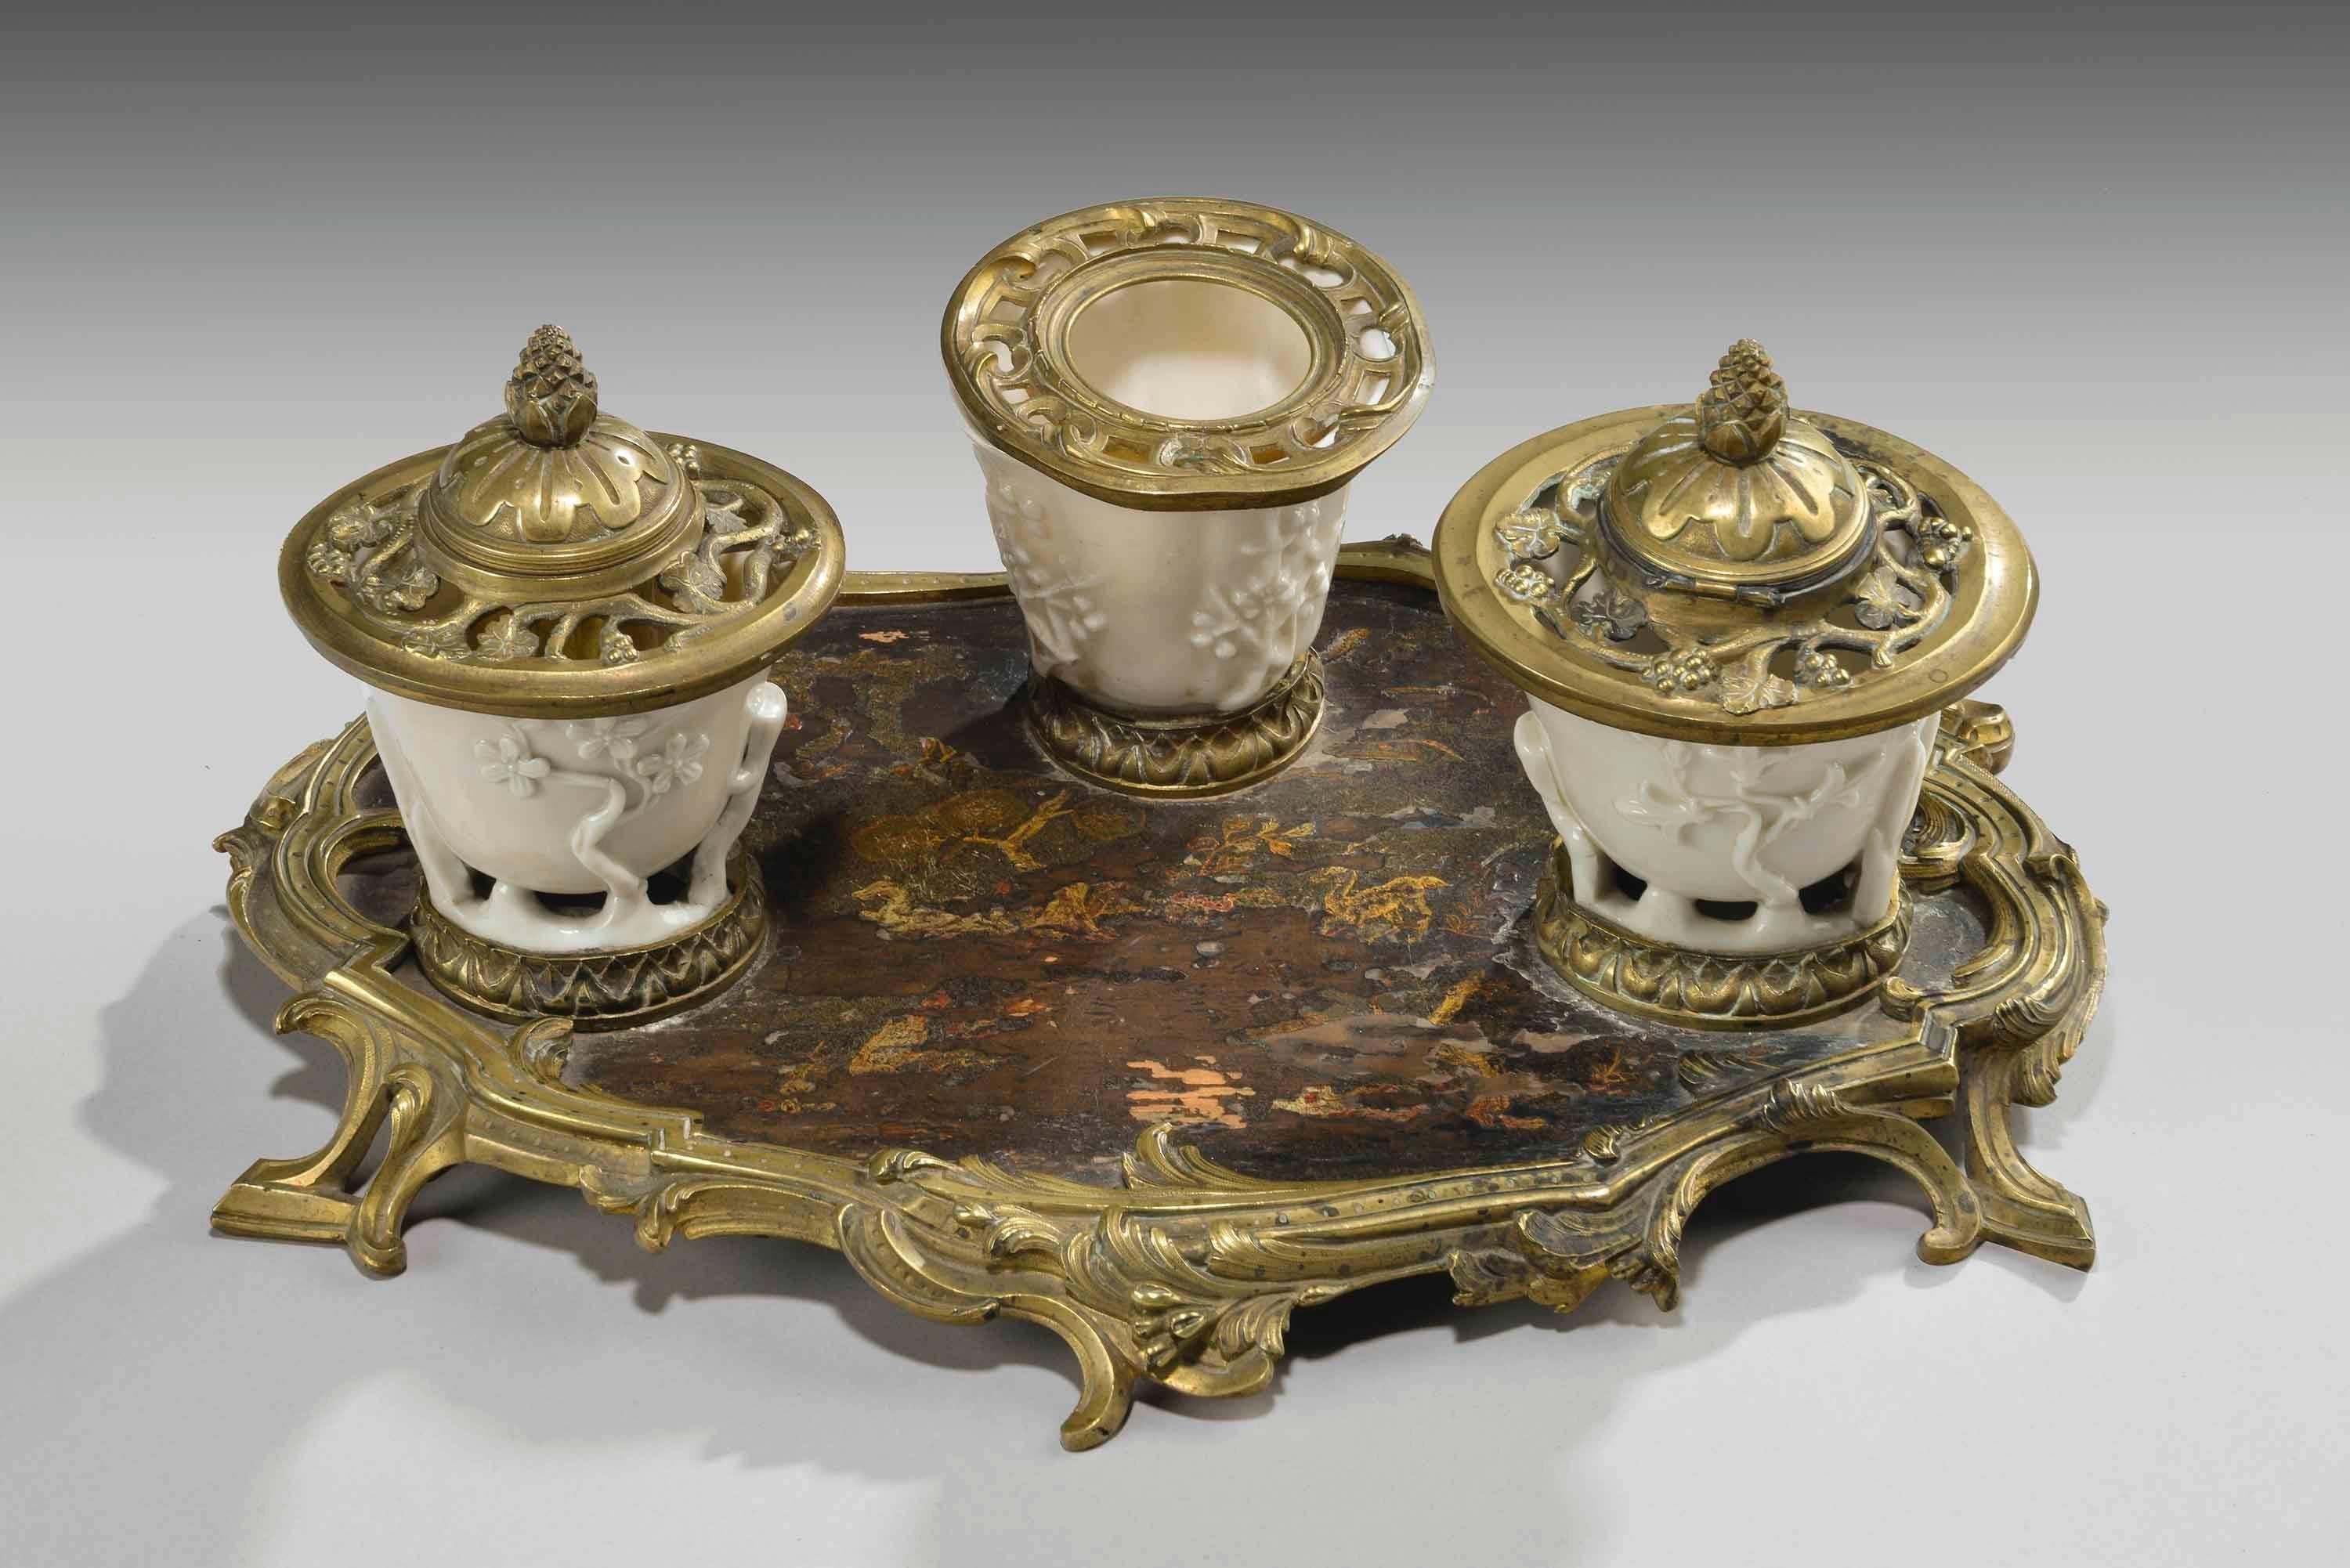 A rare 19th century gilt bronze and Chinese lacquered inkwell. The three porcelain containers of Blanc de Chine porcelain. The Rococo base framing a Chinese lacquered panel the whole in wonderful original condition.